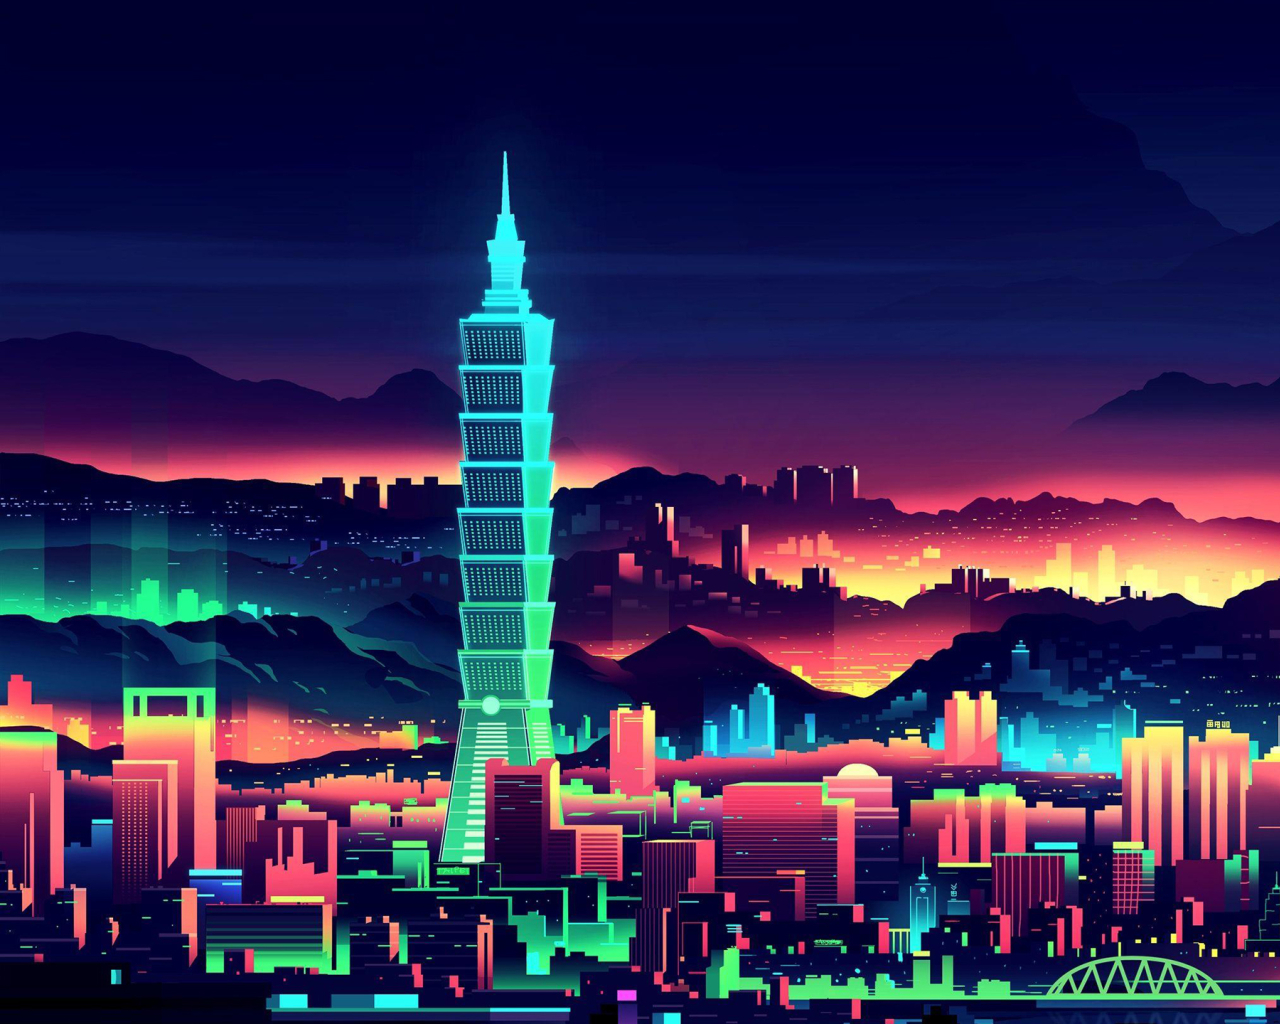 1280x1024 Vaporwave City Night 1280x1024 Resolution Wallpaper Hd Artist 4k Wallpapers Images Photos And Background Wallpapers Den